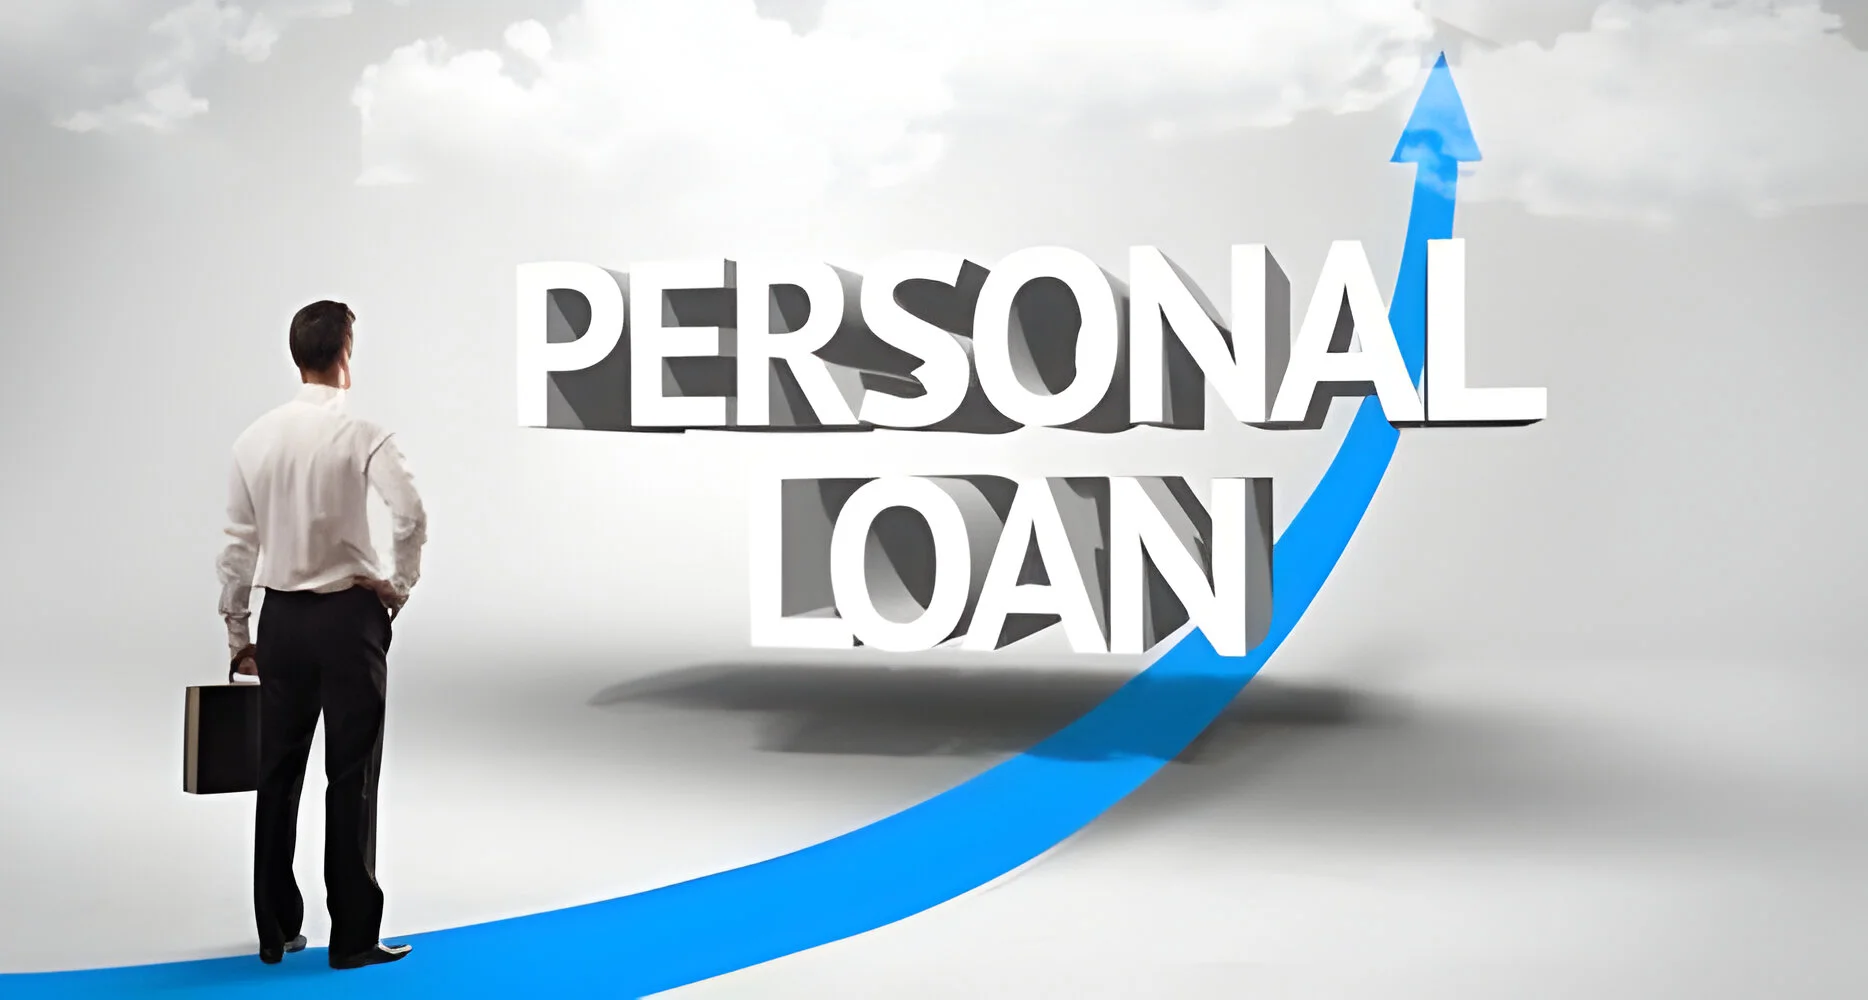 15 lakh personal loan interest rate